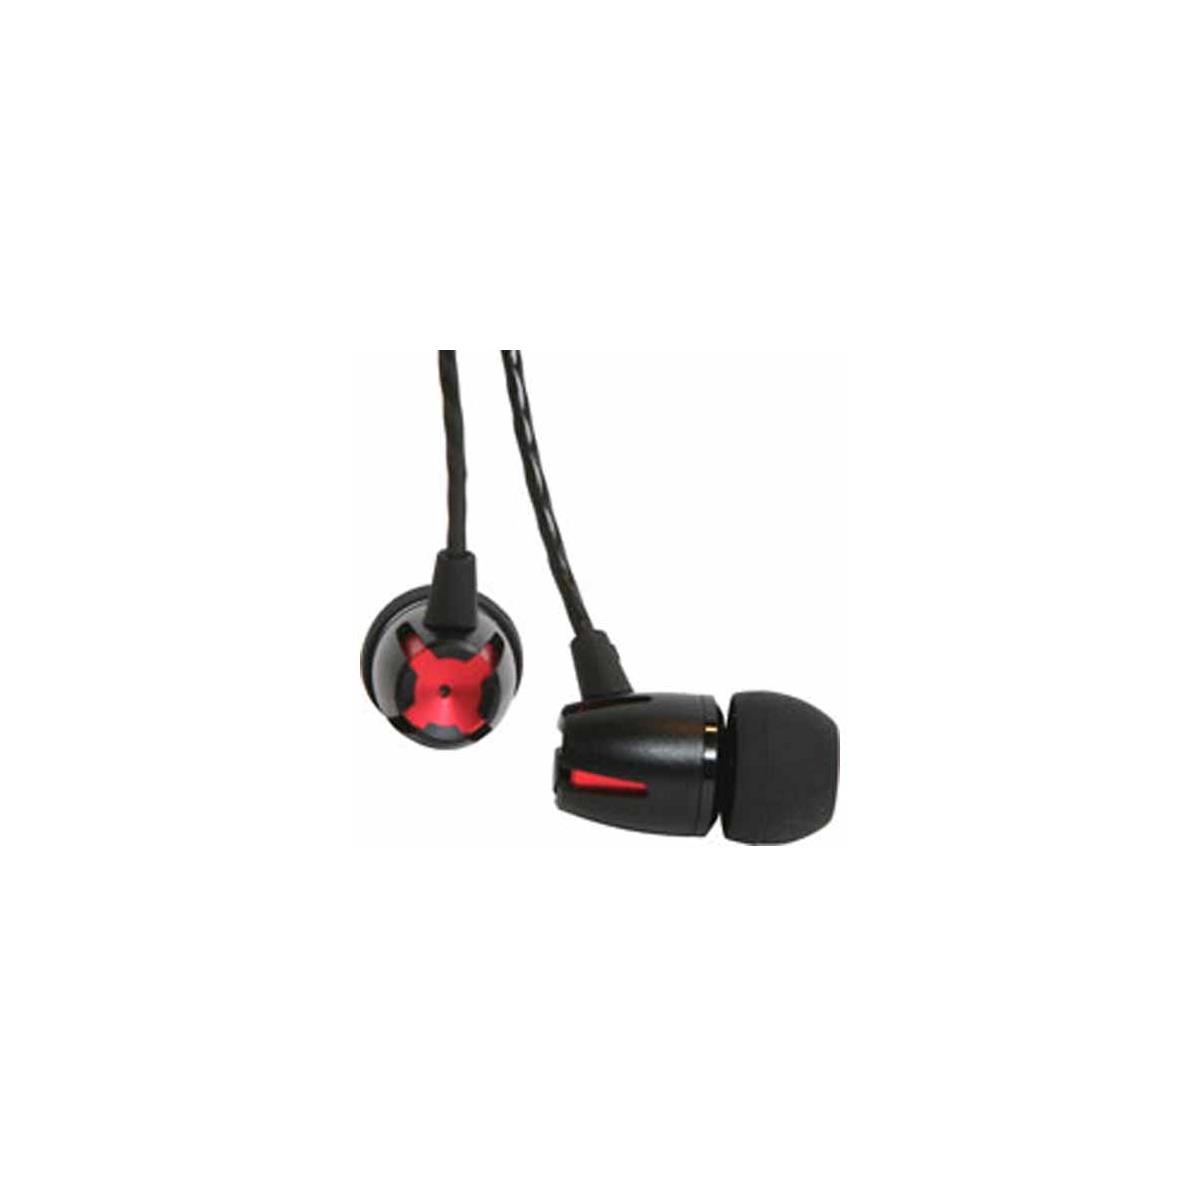 Image of Galaxy Audio EB4 Single-Driver In-Ear Stereo Monitor Headphones